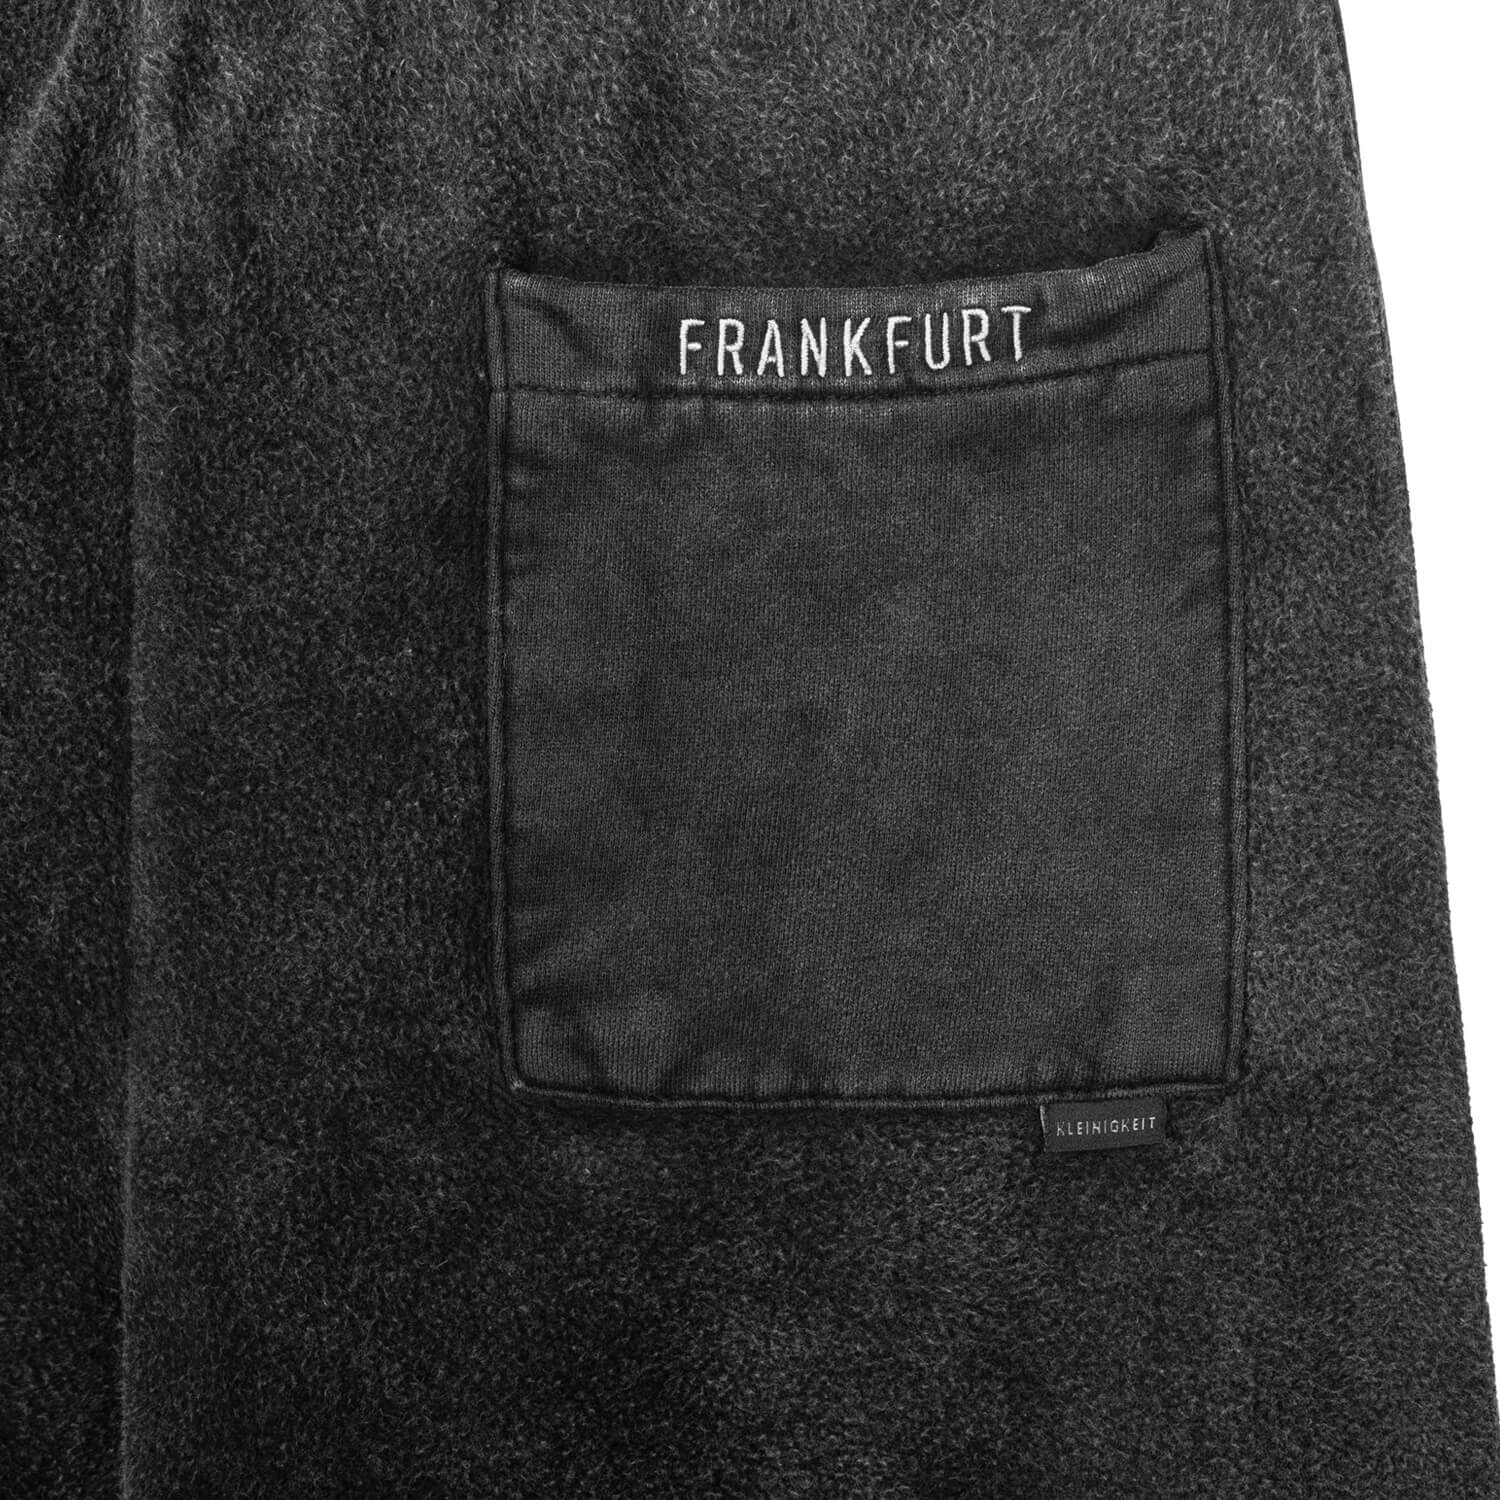 Bild 6: Sweatpants “Out of Love for You” Dark